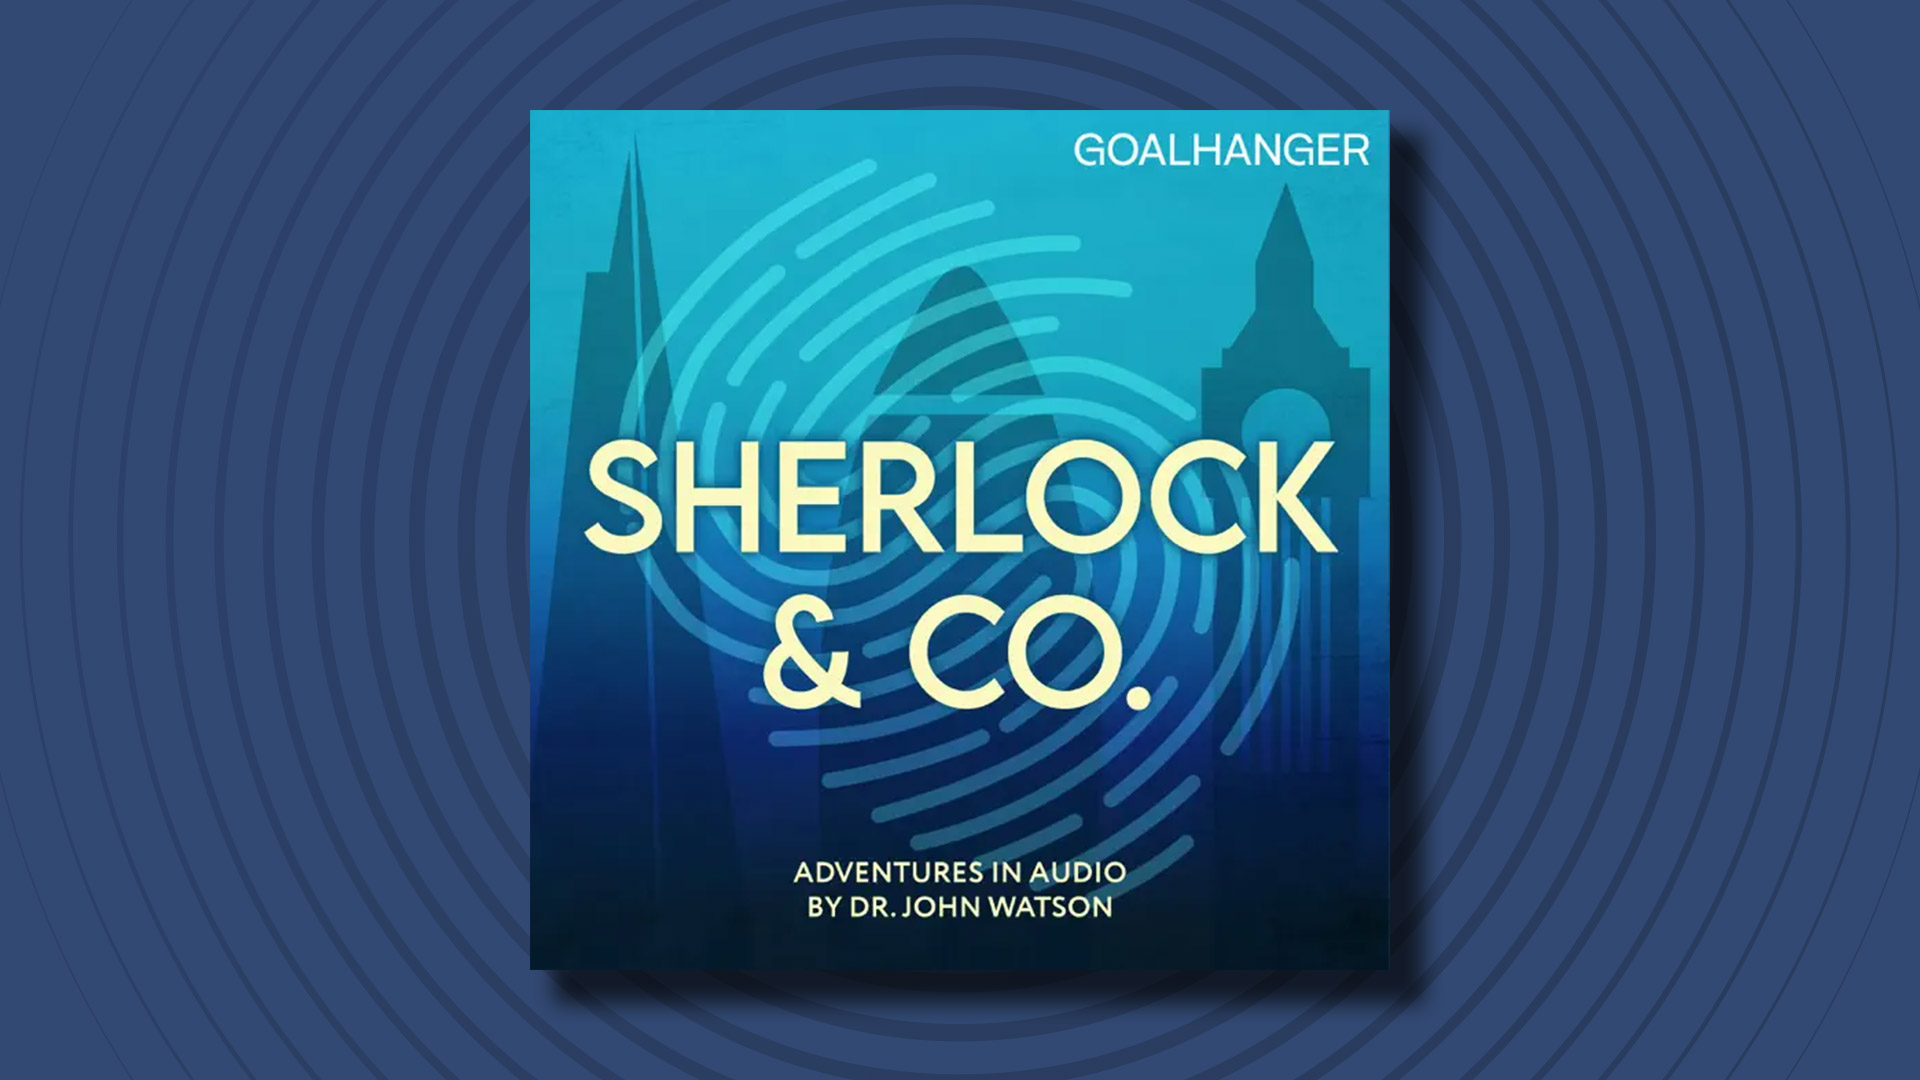 The logo of the Sherlock & Co. podcast on a dark blue background